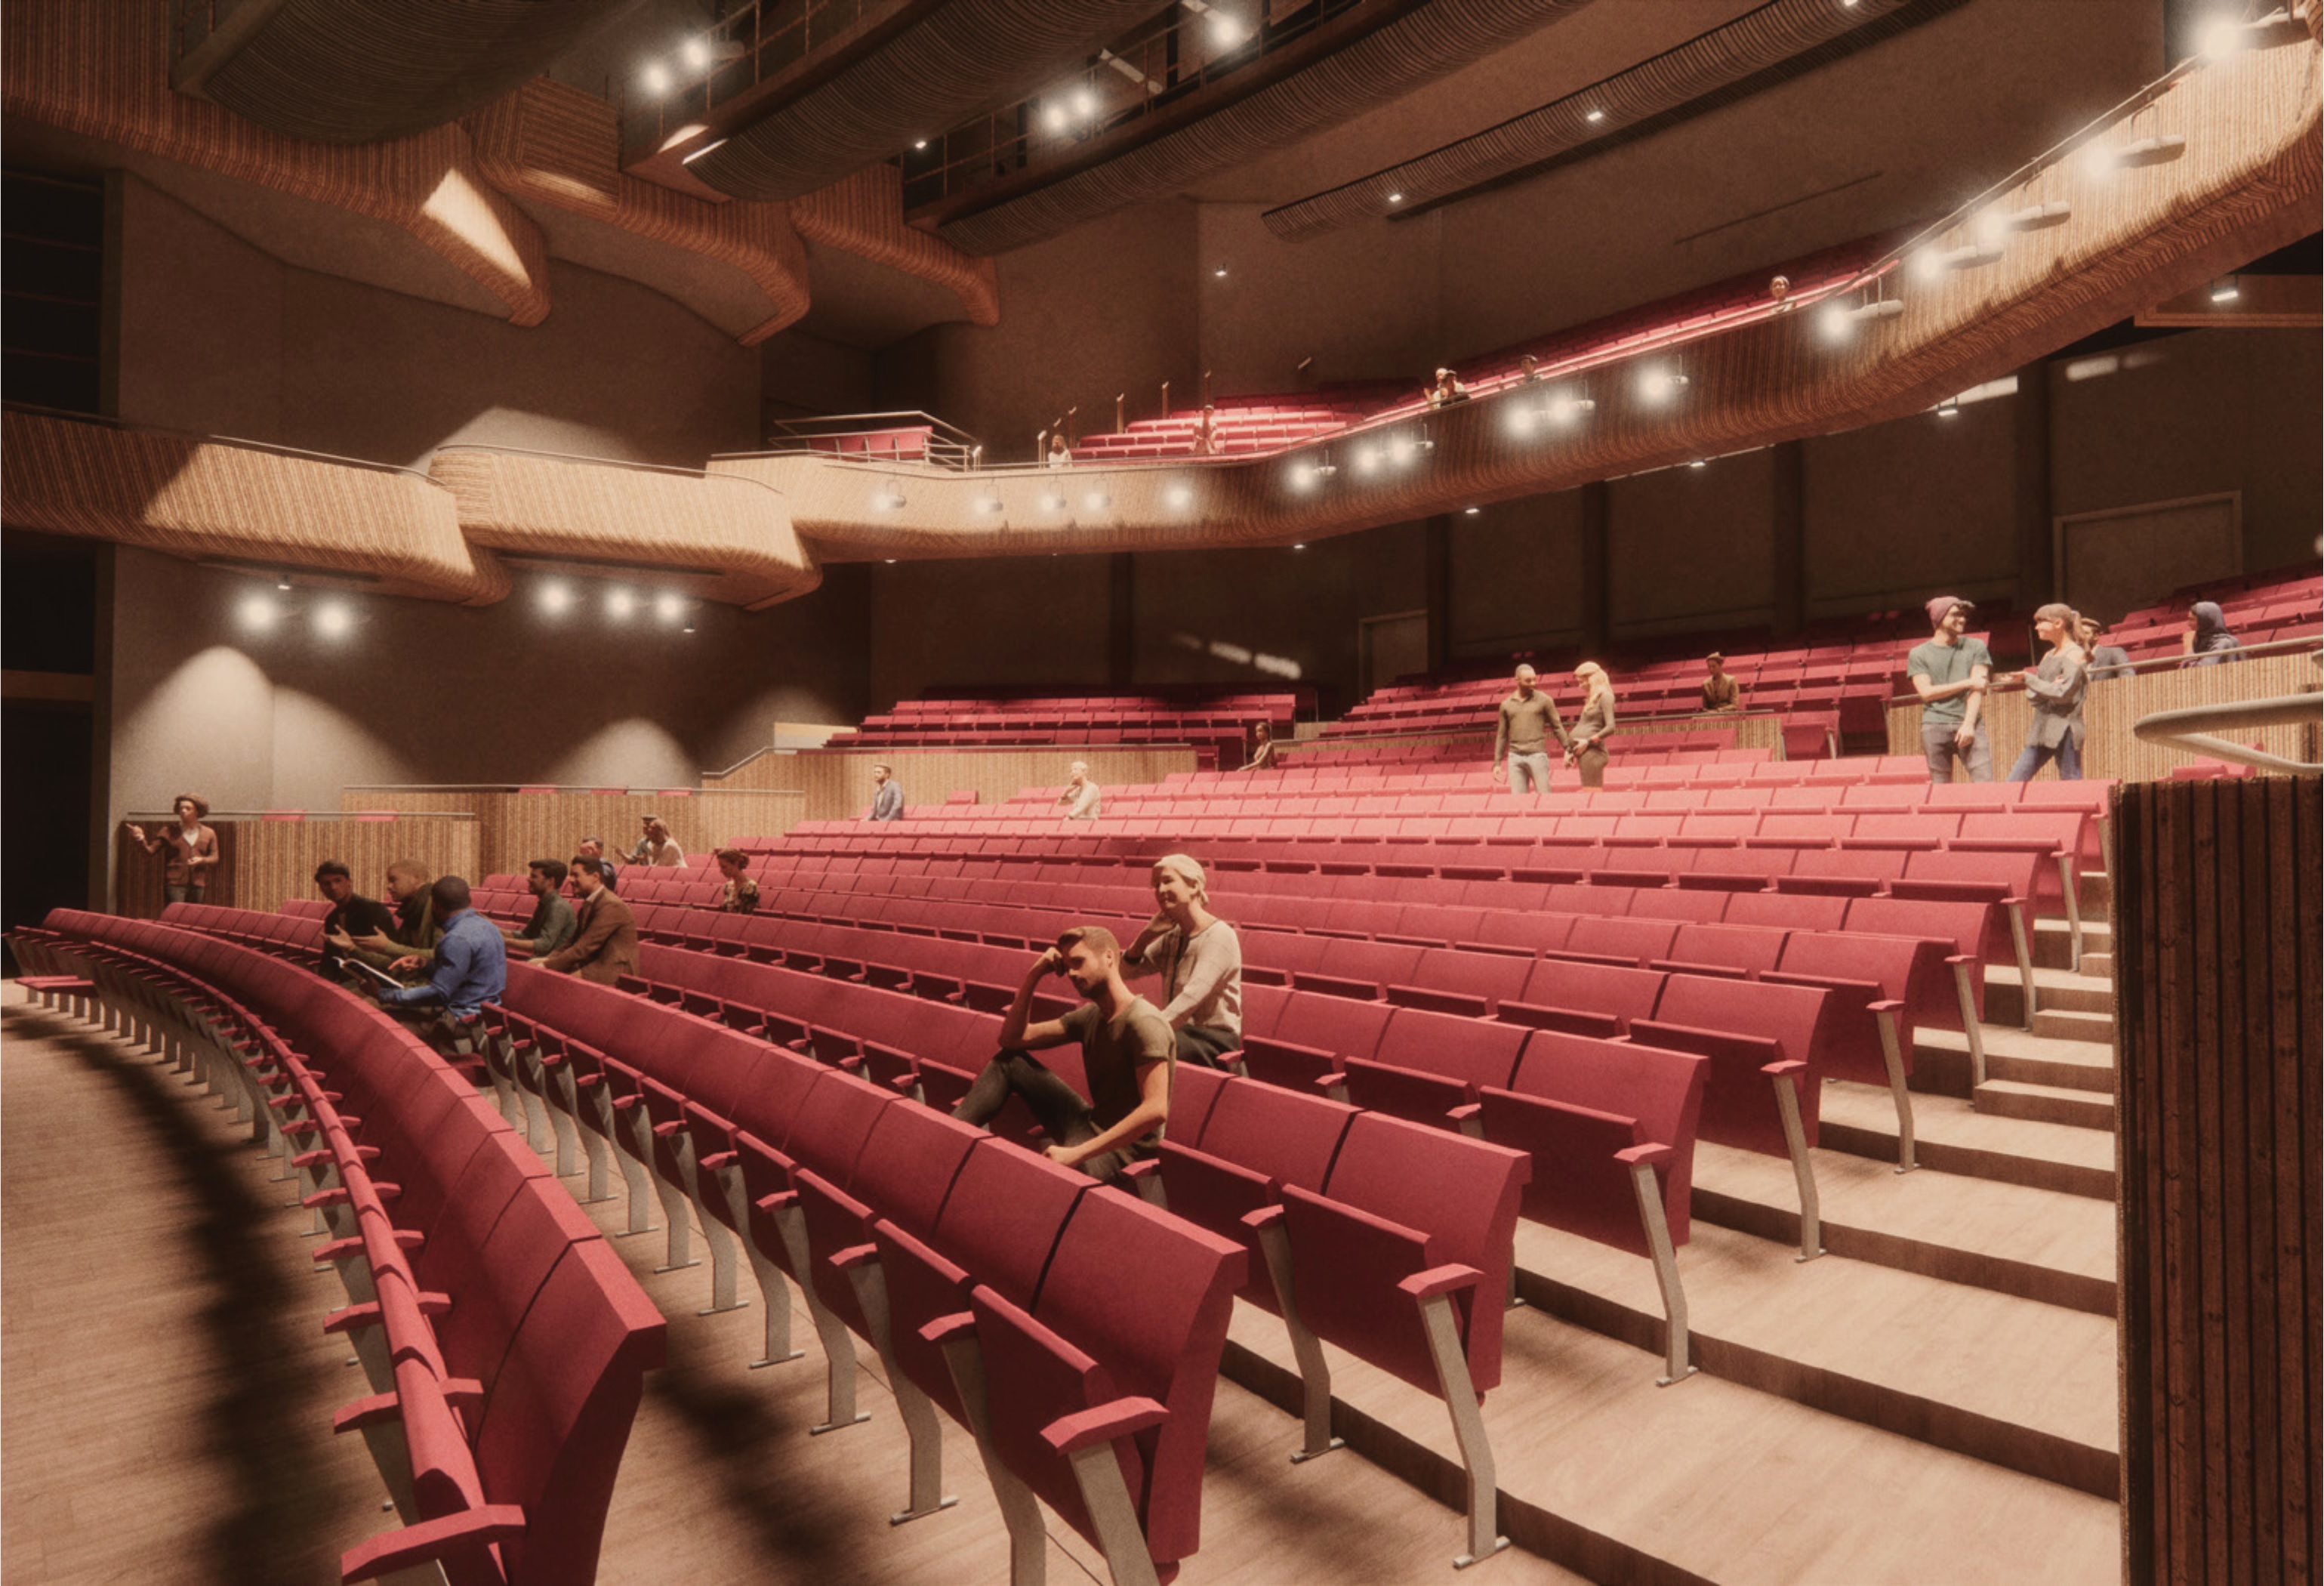 An artists impression of the auditorium.